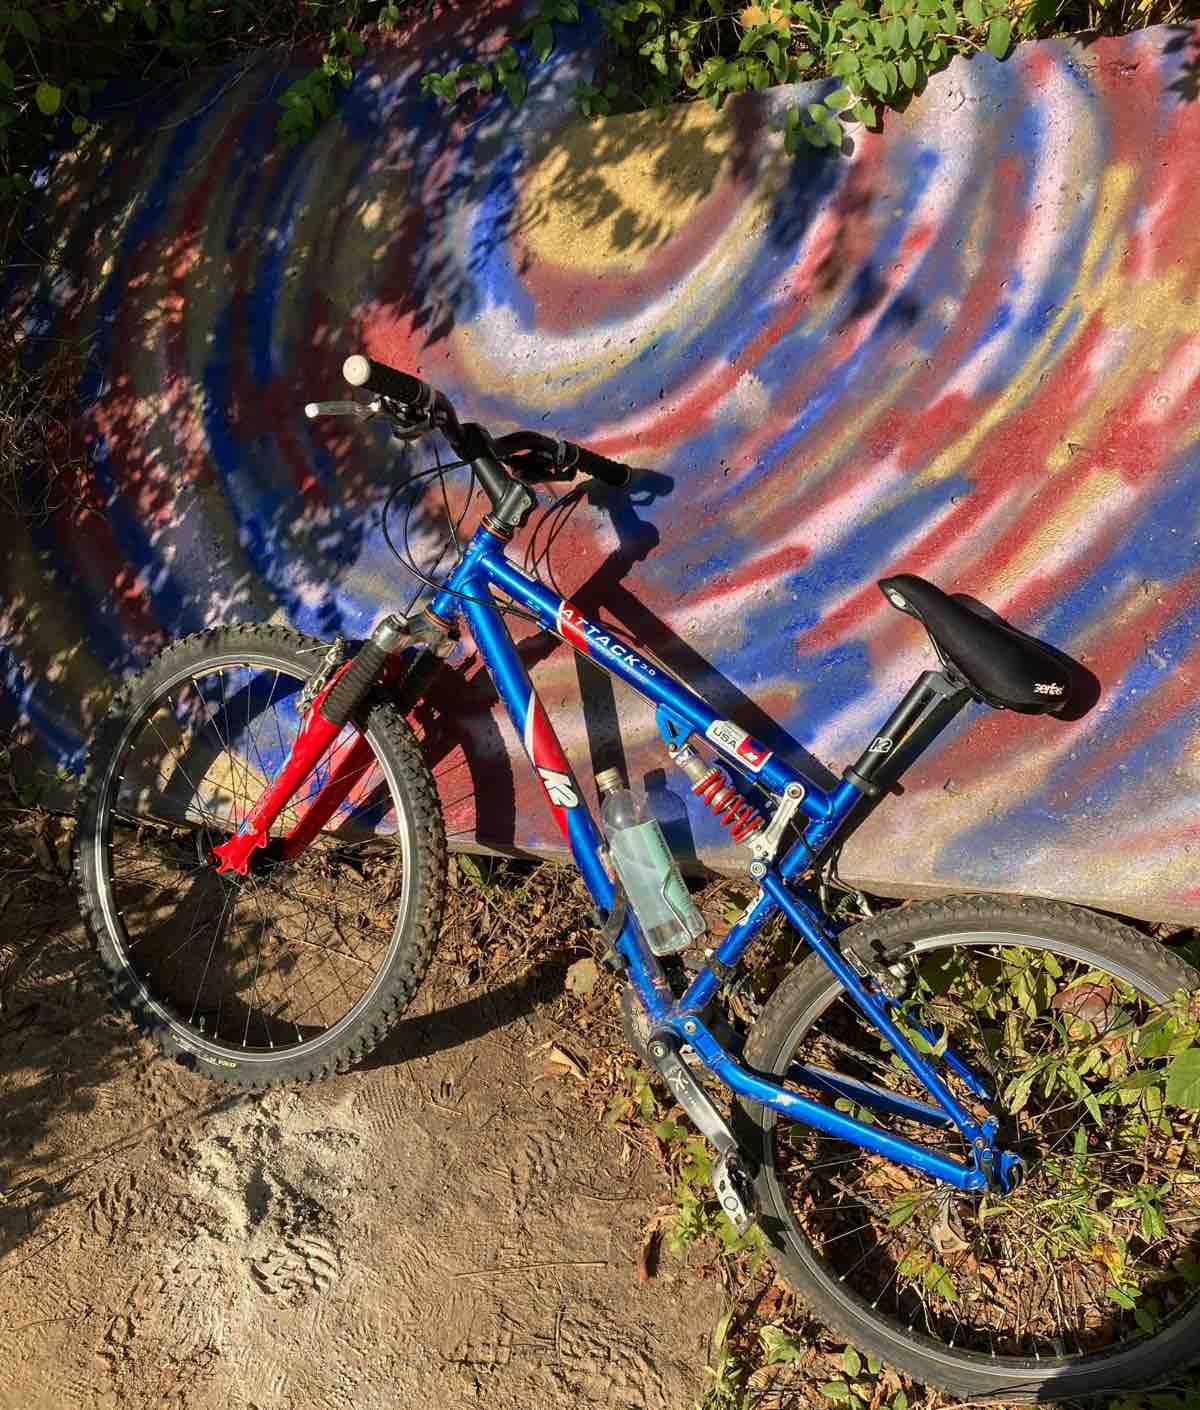 bikerumor pic of the day a blue K2 mountain bike with red fork leans against a concrete wall with a spray painted swirl design with the same colors.